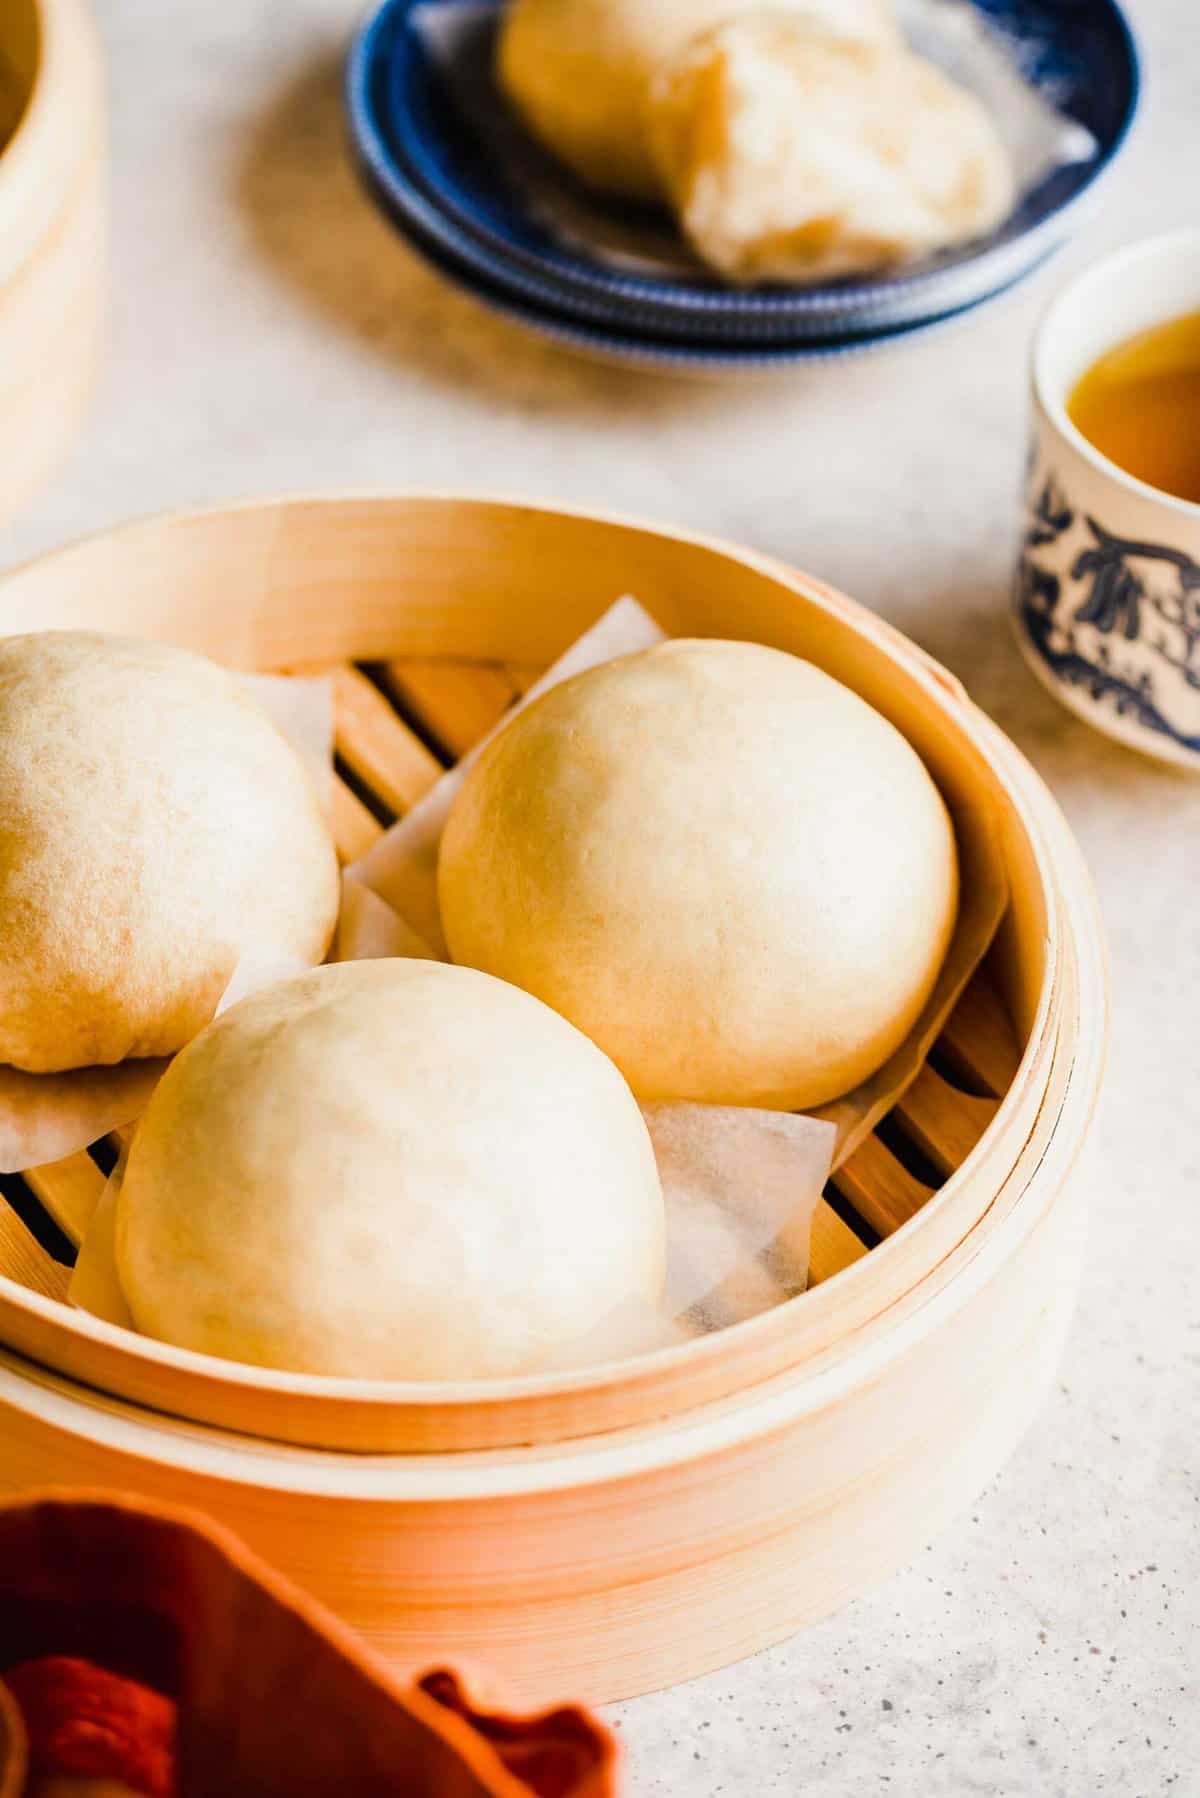 Three Chinese steamed buns sitting in a steamer, with a bun on a plate in the background, next to a cup of tea